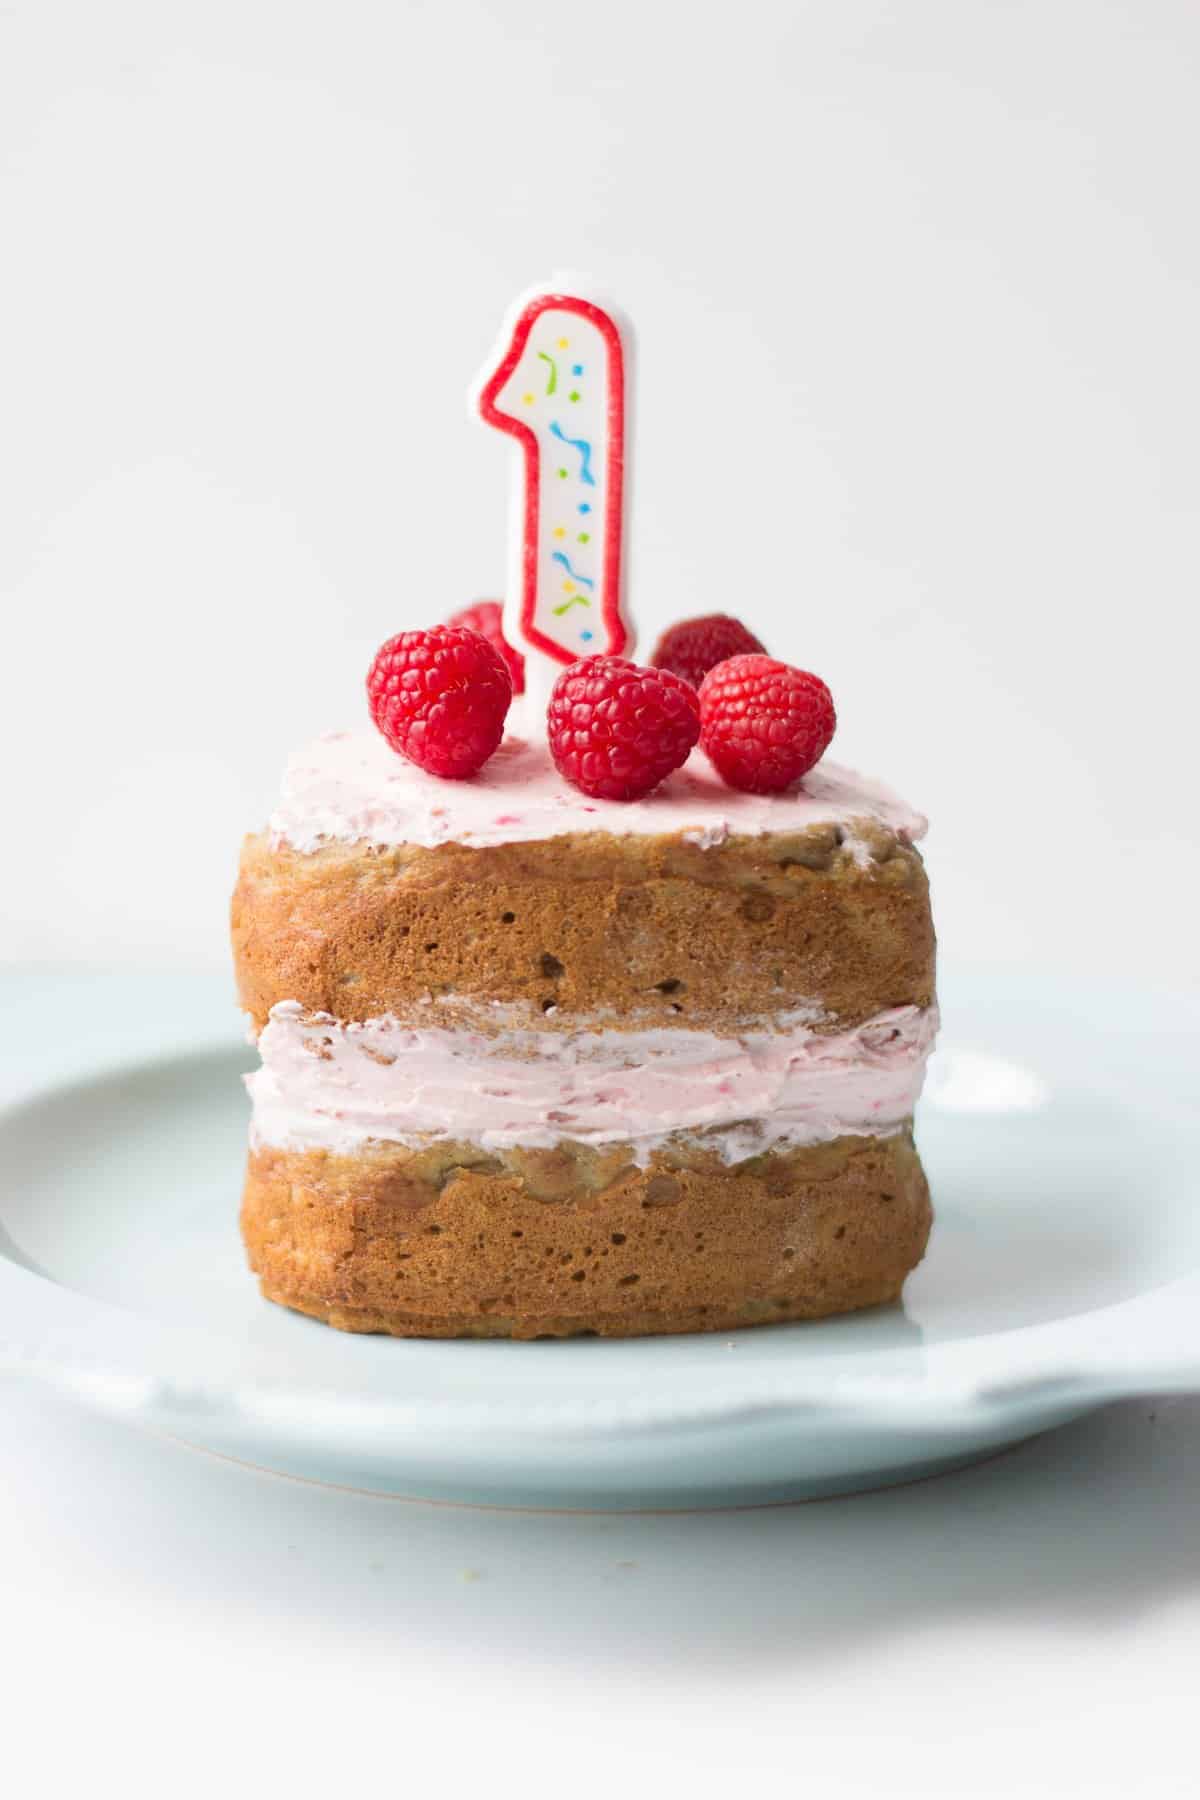 Healthy First Birthday Smash Cake Without Sugar - MJ and Hungryman